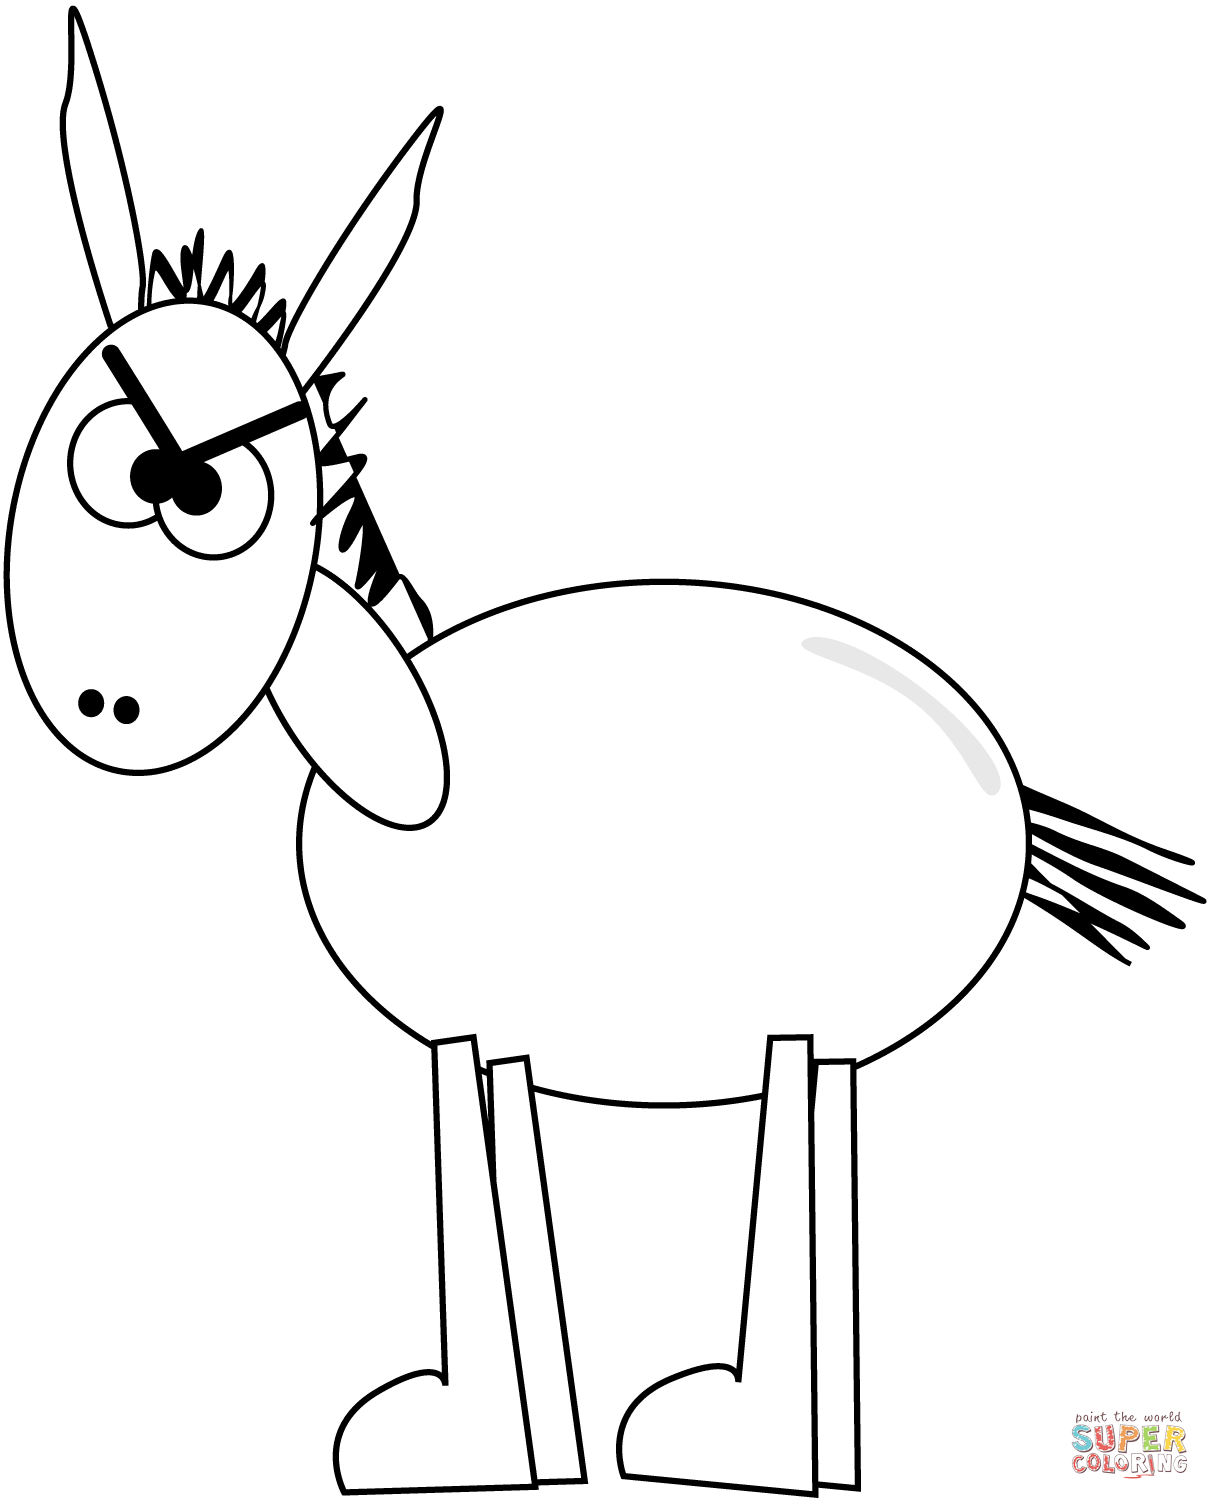 Donkeys coloring pages | Free Coloring Pages